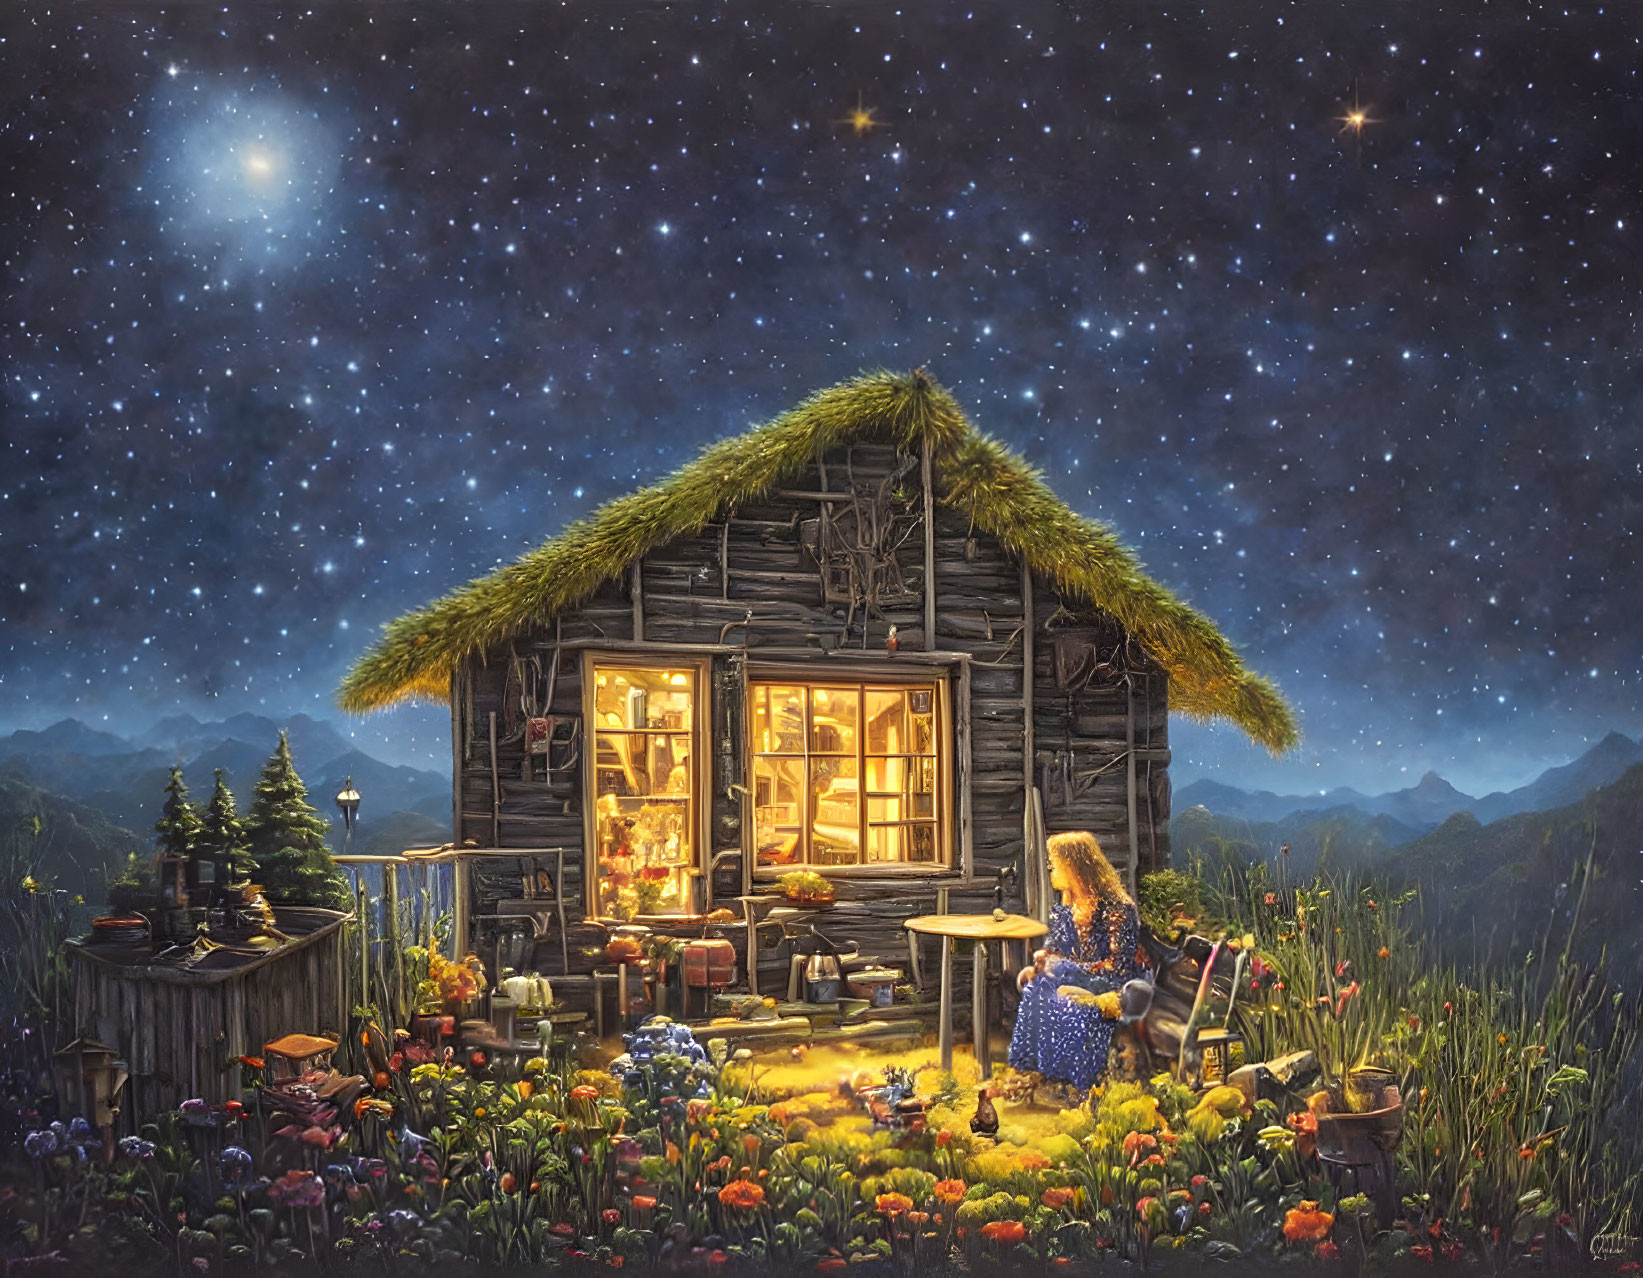 Person sitting outside illuminated cottage in lush night garden